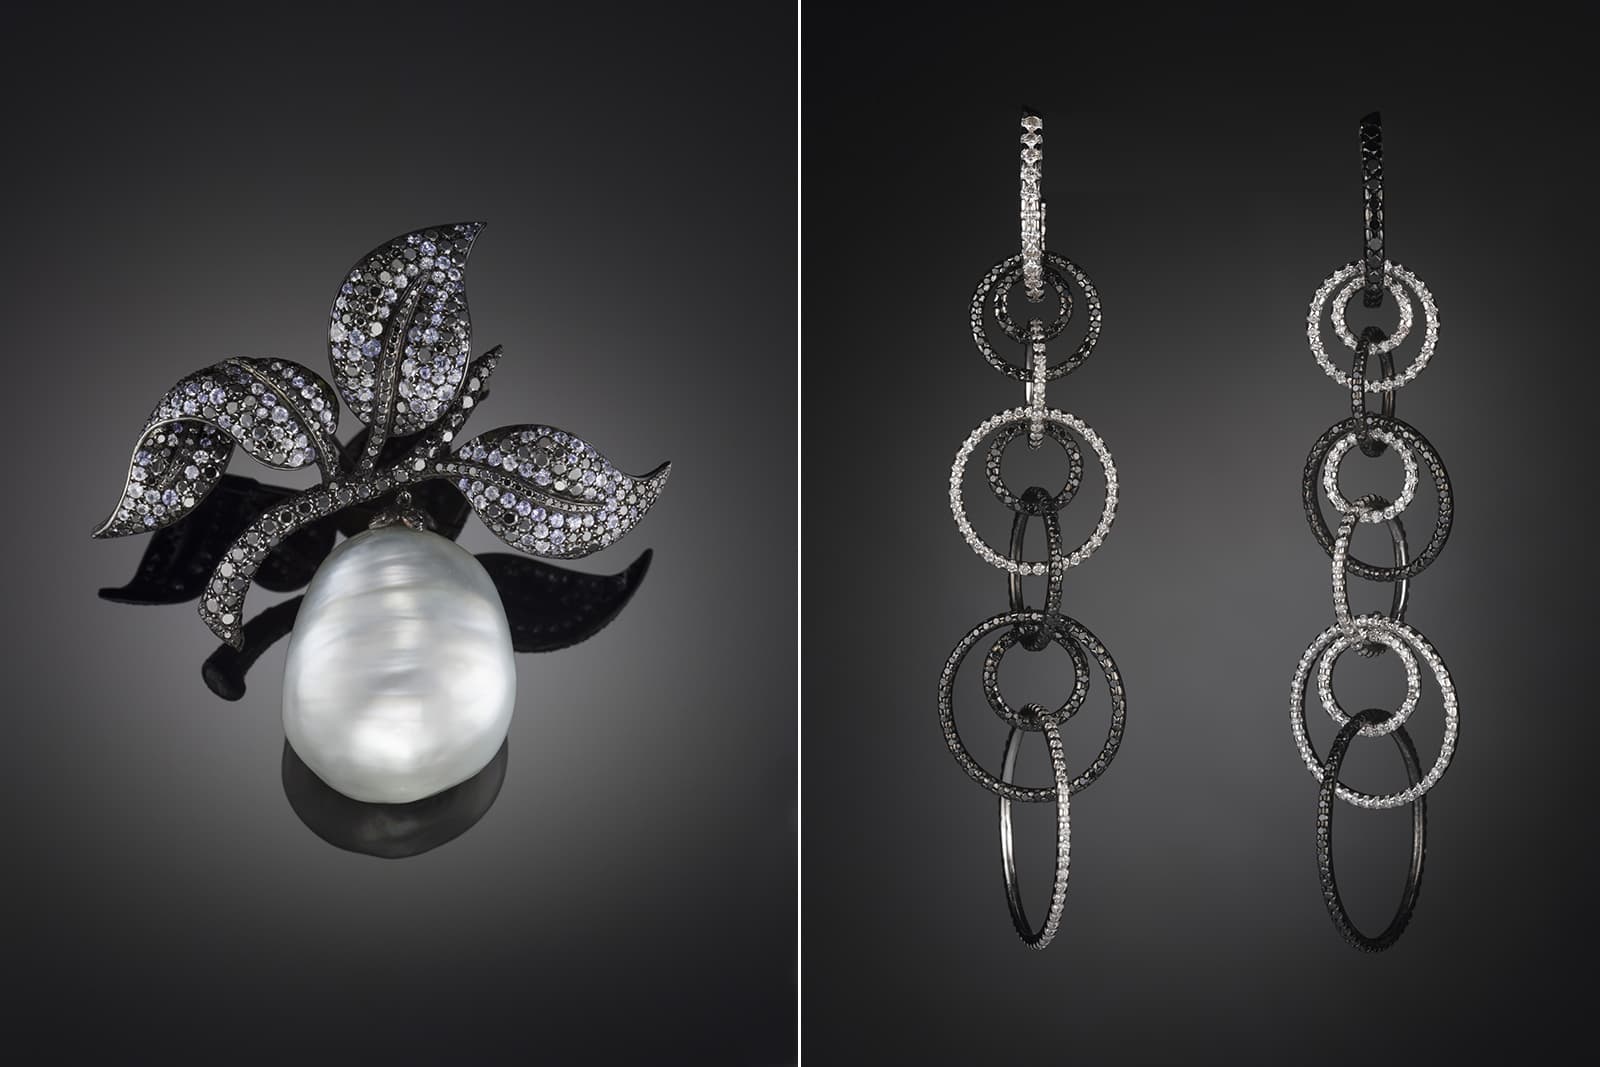 Carnet by Michelle Ong brooch with South Sea baroque pearl, black diamonds and blue sapphires in platinum and silver, and earrings with colourless and black diamonds in white gold